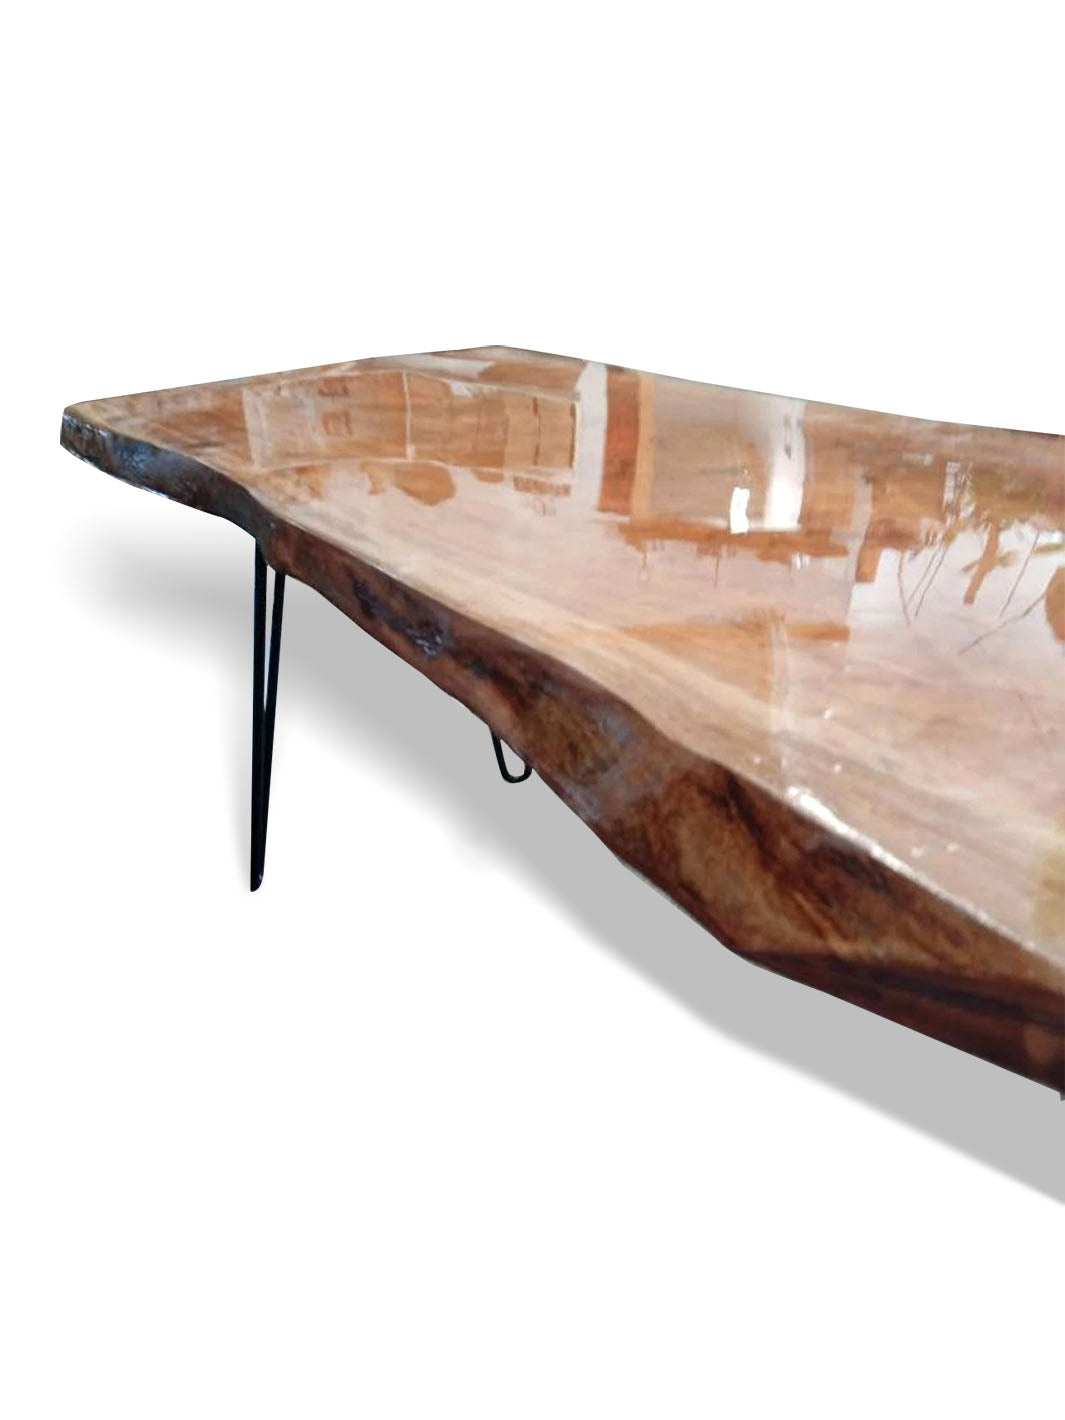 Handcrafted Mid Century Modern Cherry Wood Coffee Table | Live Edge Cherry Bench DaddyO's Coffee Tables DAD0418-1